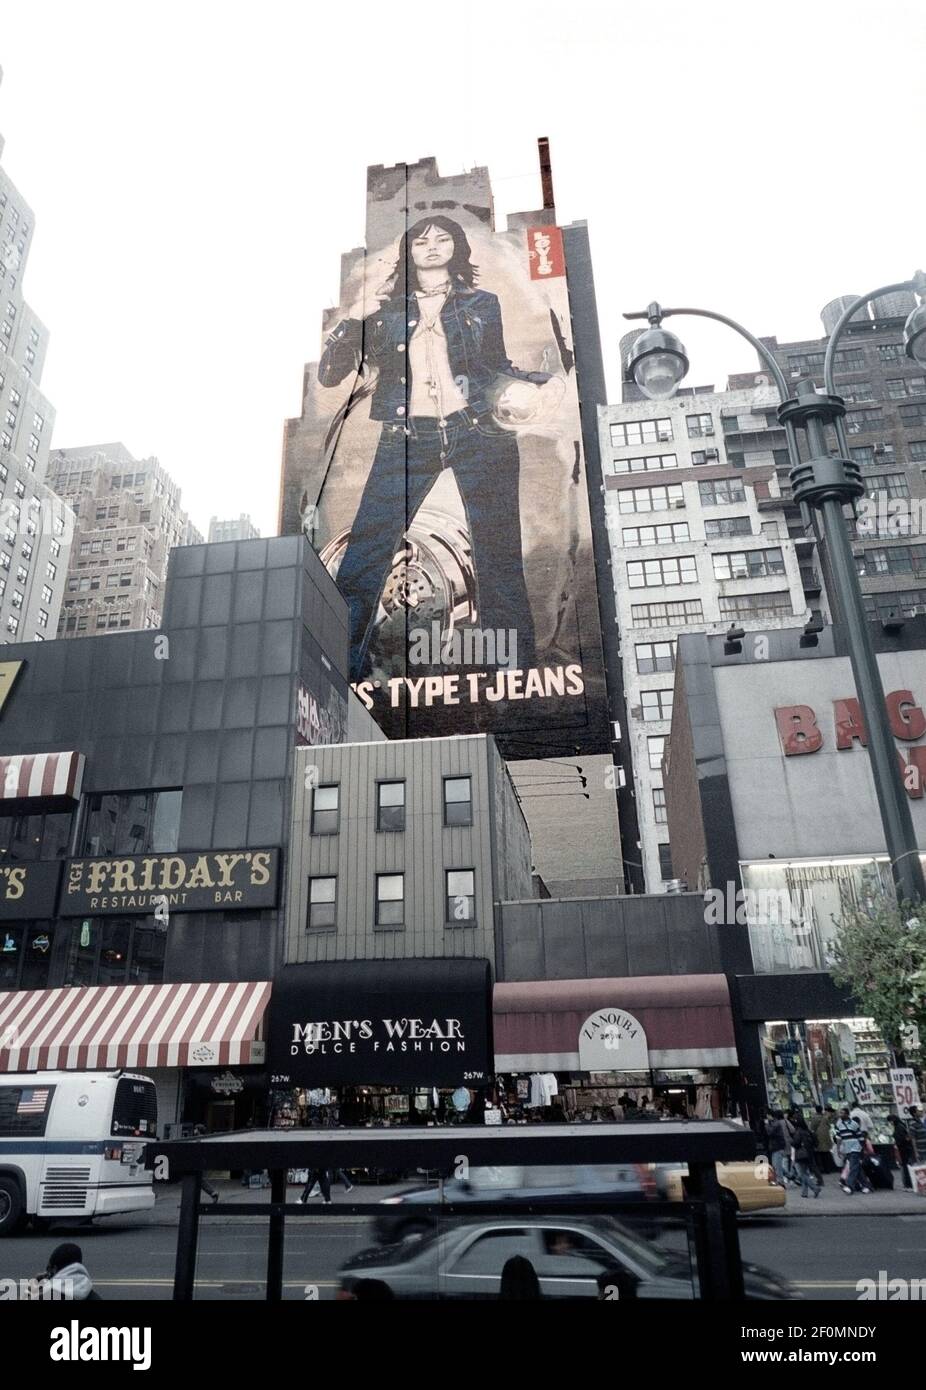 A billboard for Levi's Jeans on the side of a building on October 19, 2003.  Levi Strauss & Co. announced that they will open 100 new stores over the  next year. (Photo